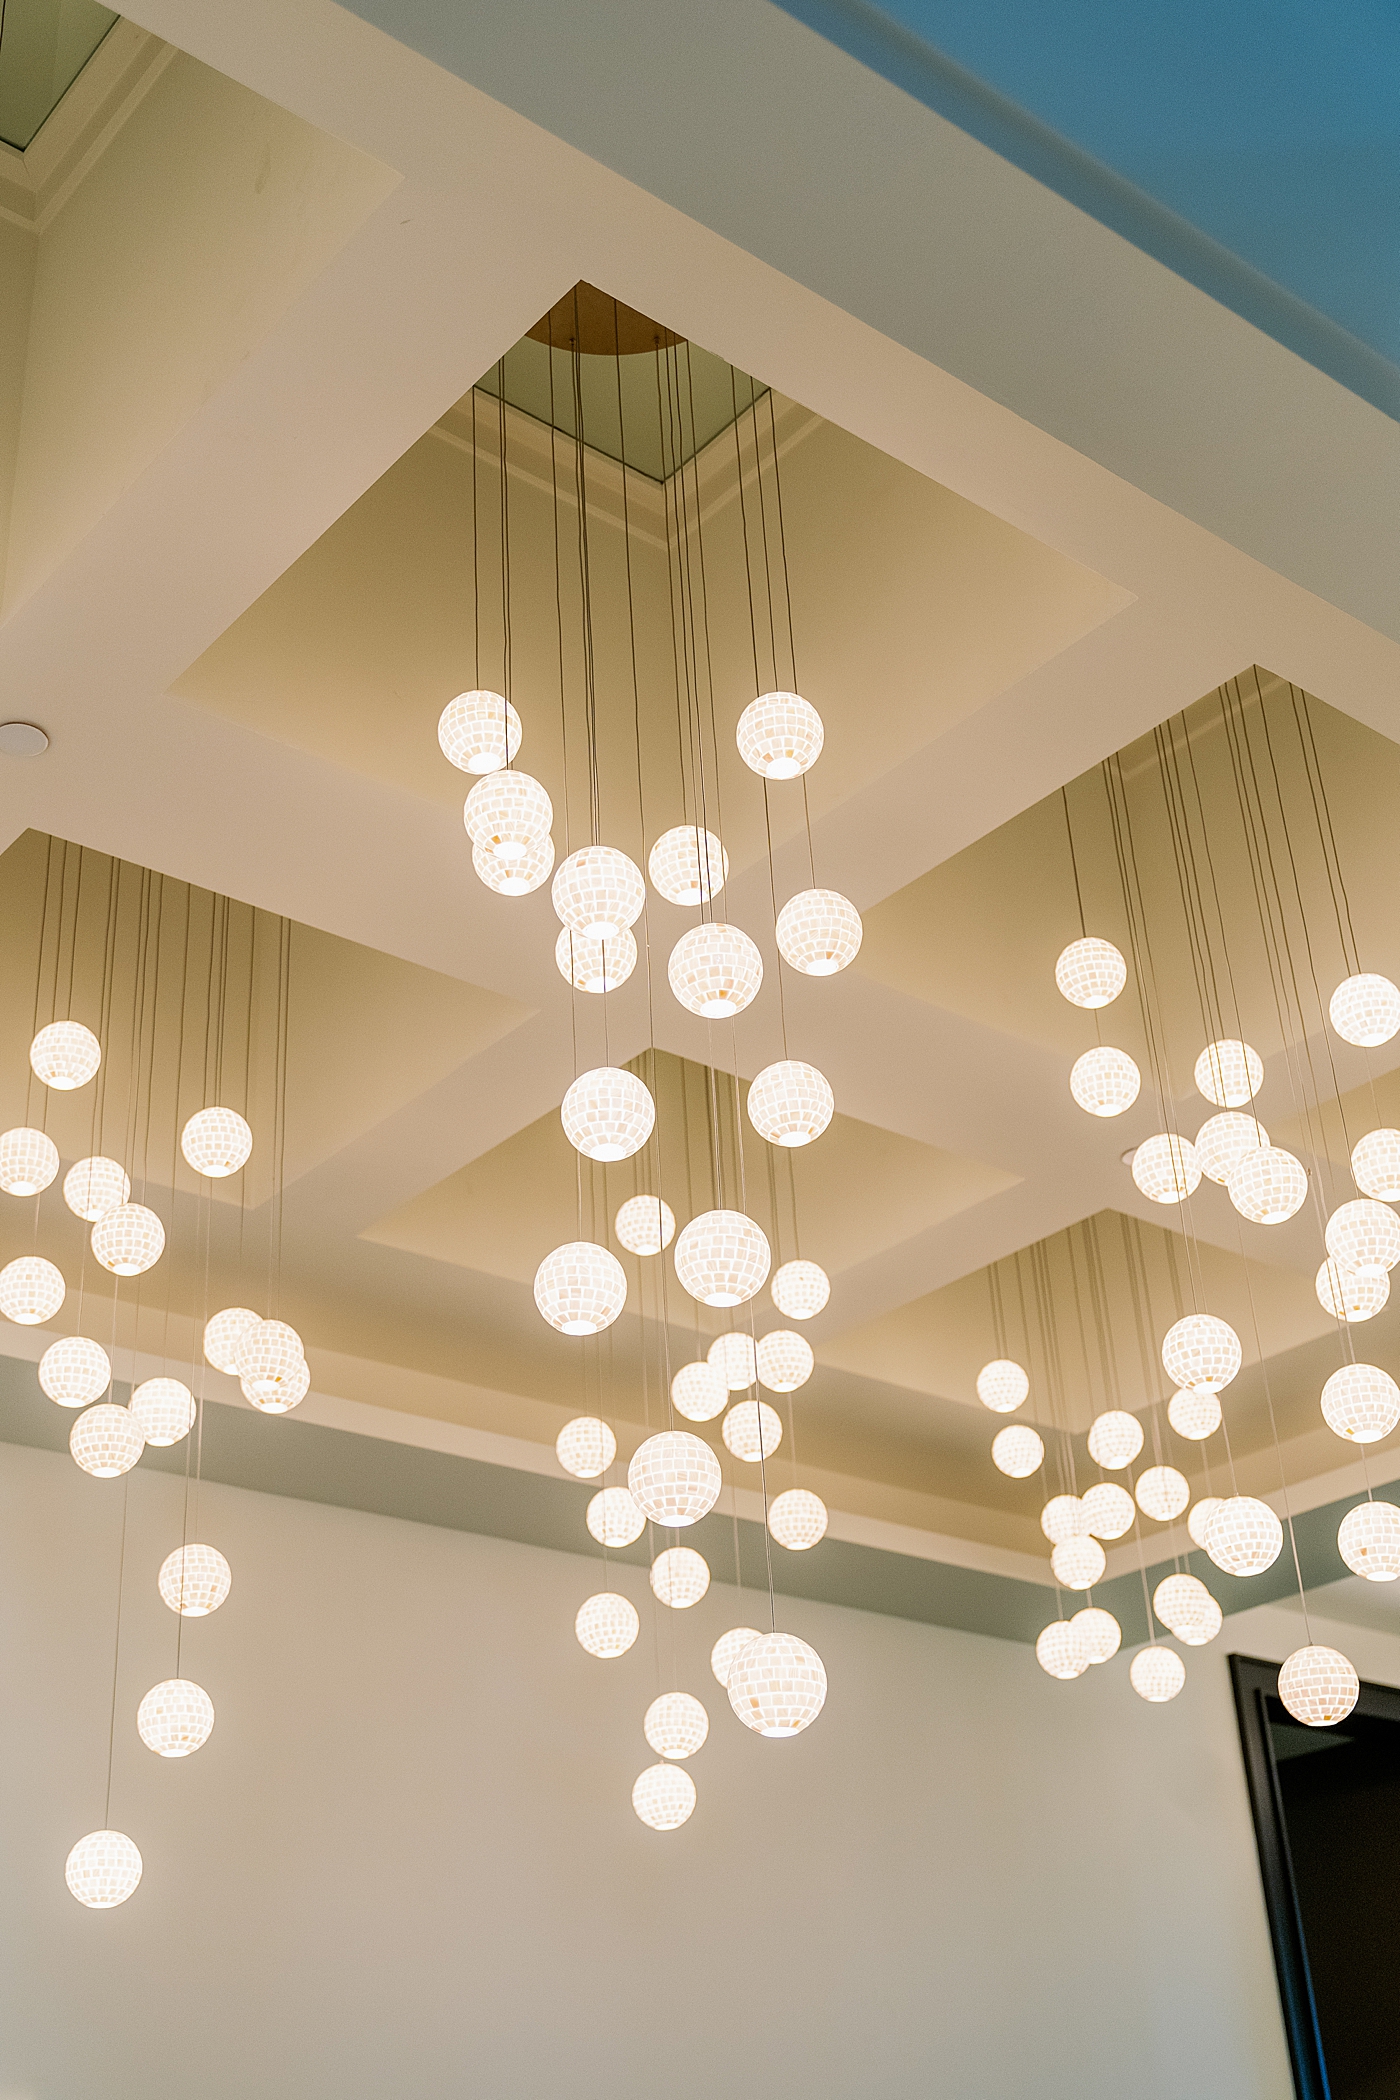 Circular lights at a wedding reception | Photo by Annie Laura Photography